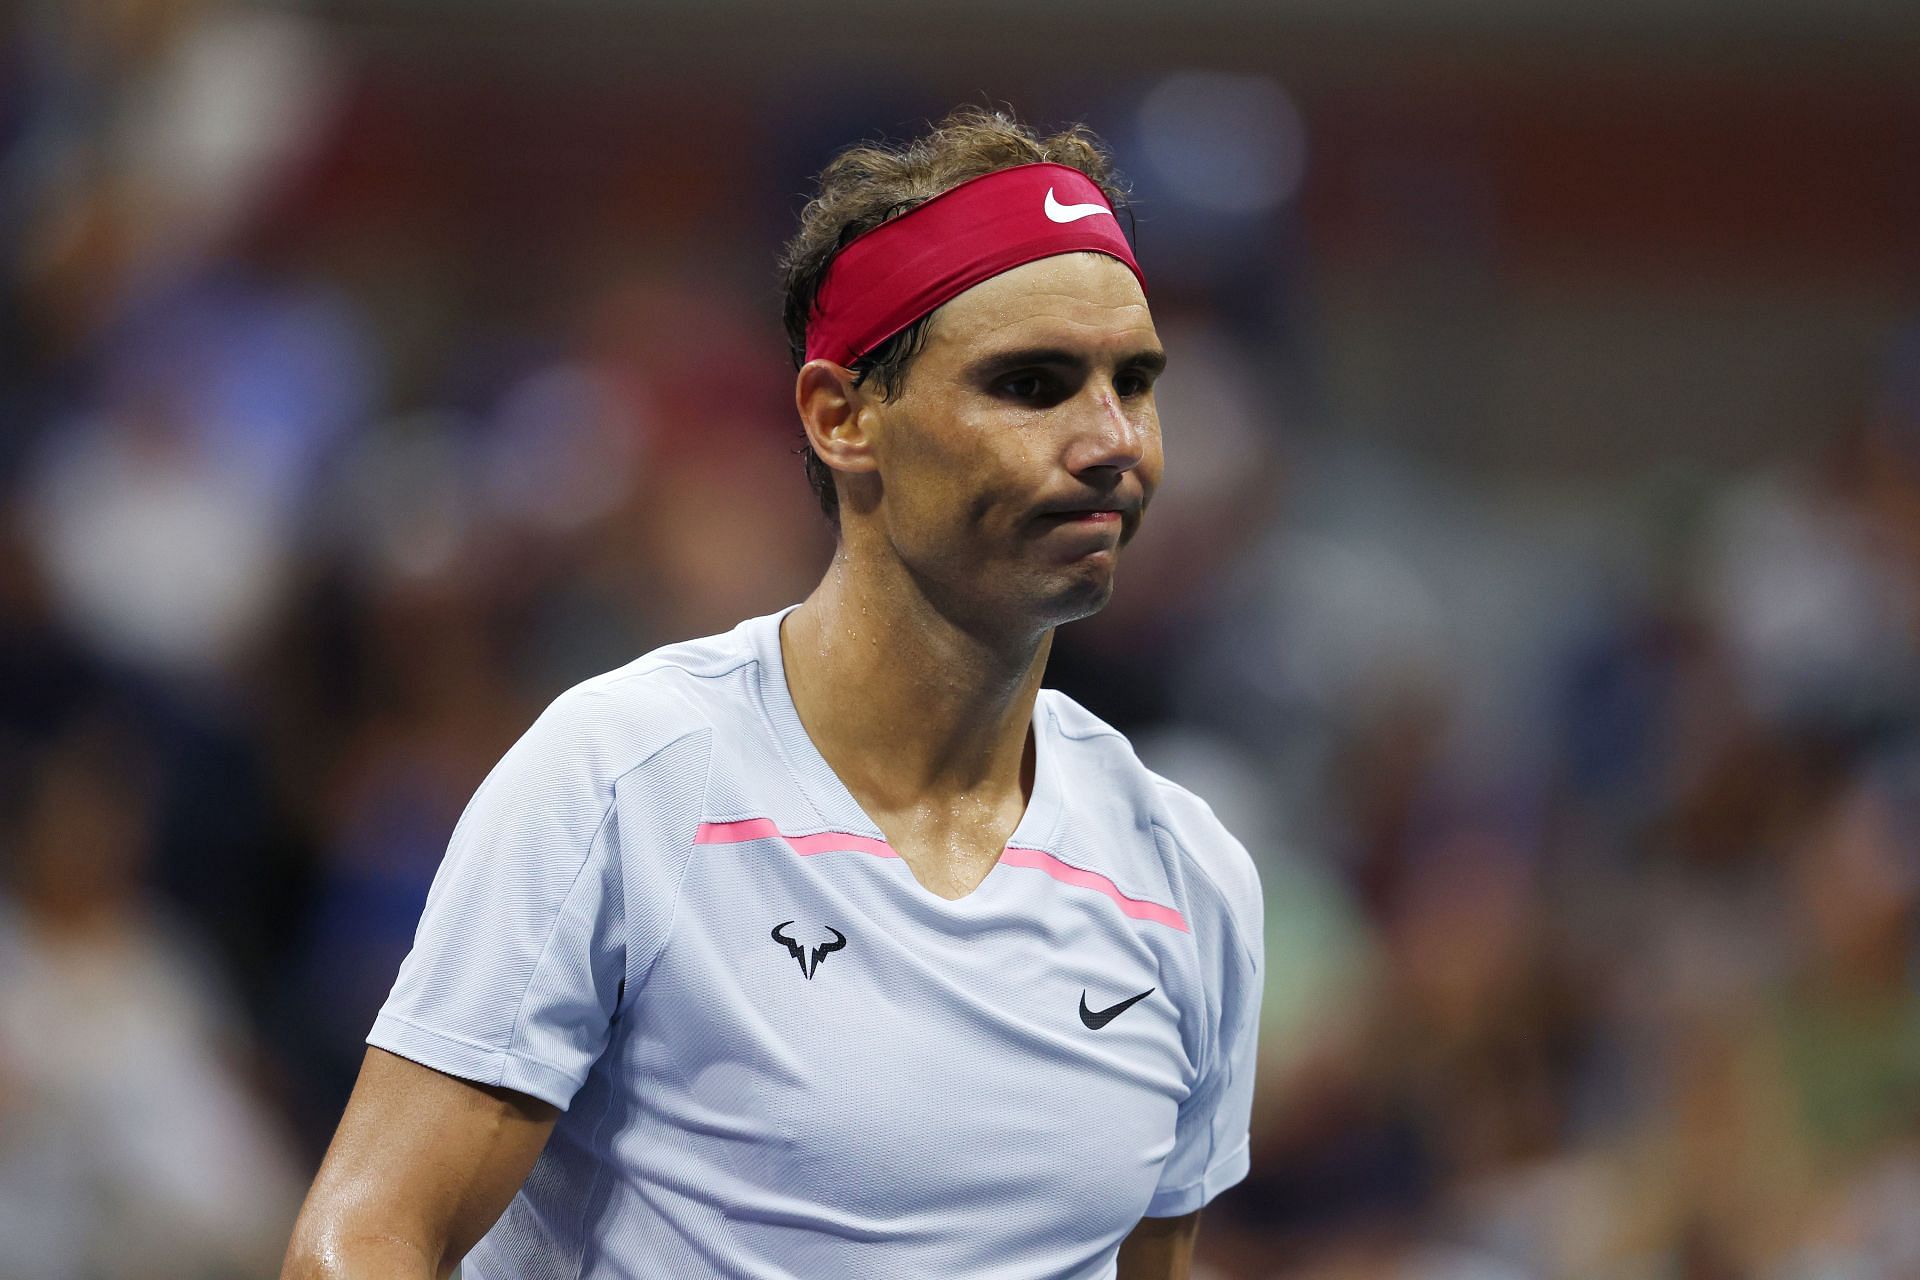 Rafael Nadal bowed out of the 2022 US Open in the fourth round.